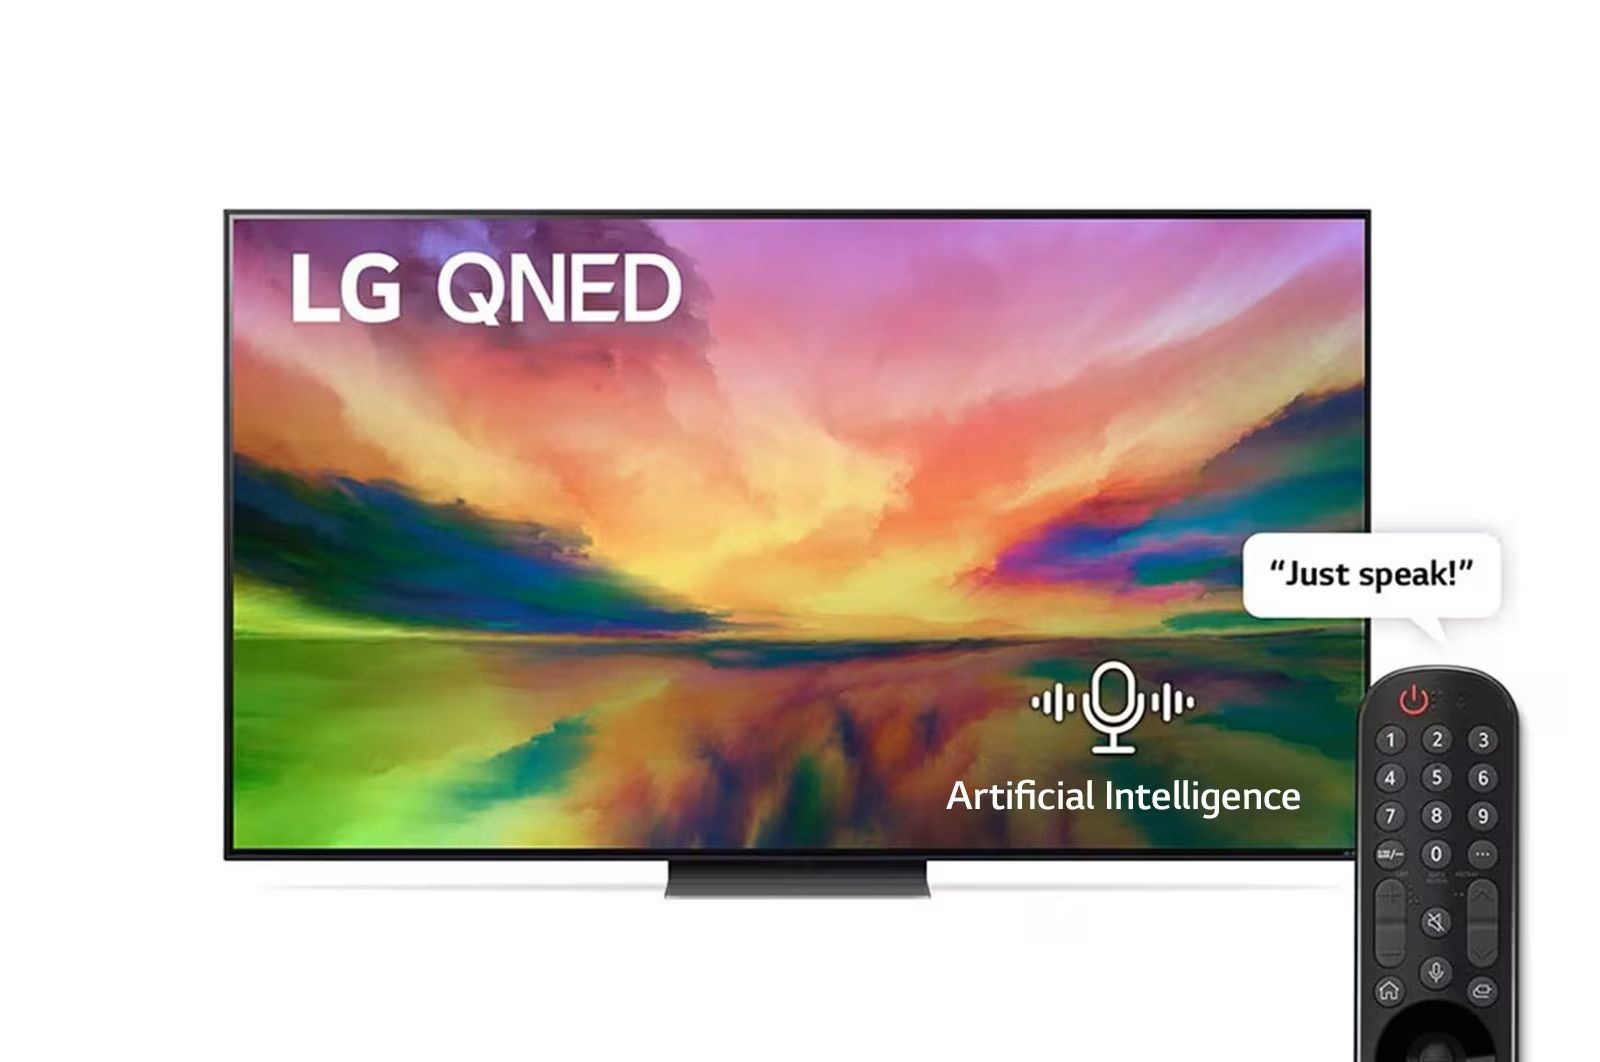 LG OLED 55 A2: Stunning Picture Quality & Smart Features | LG-Tech Junction Store